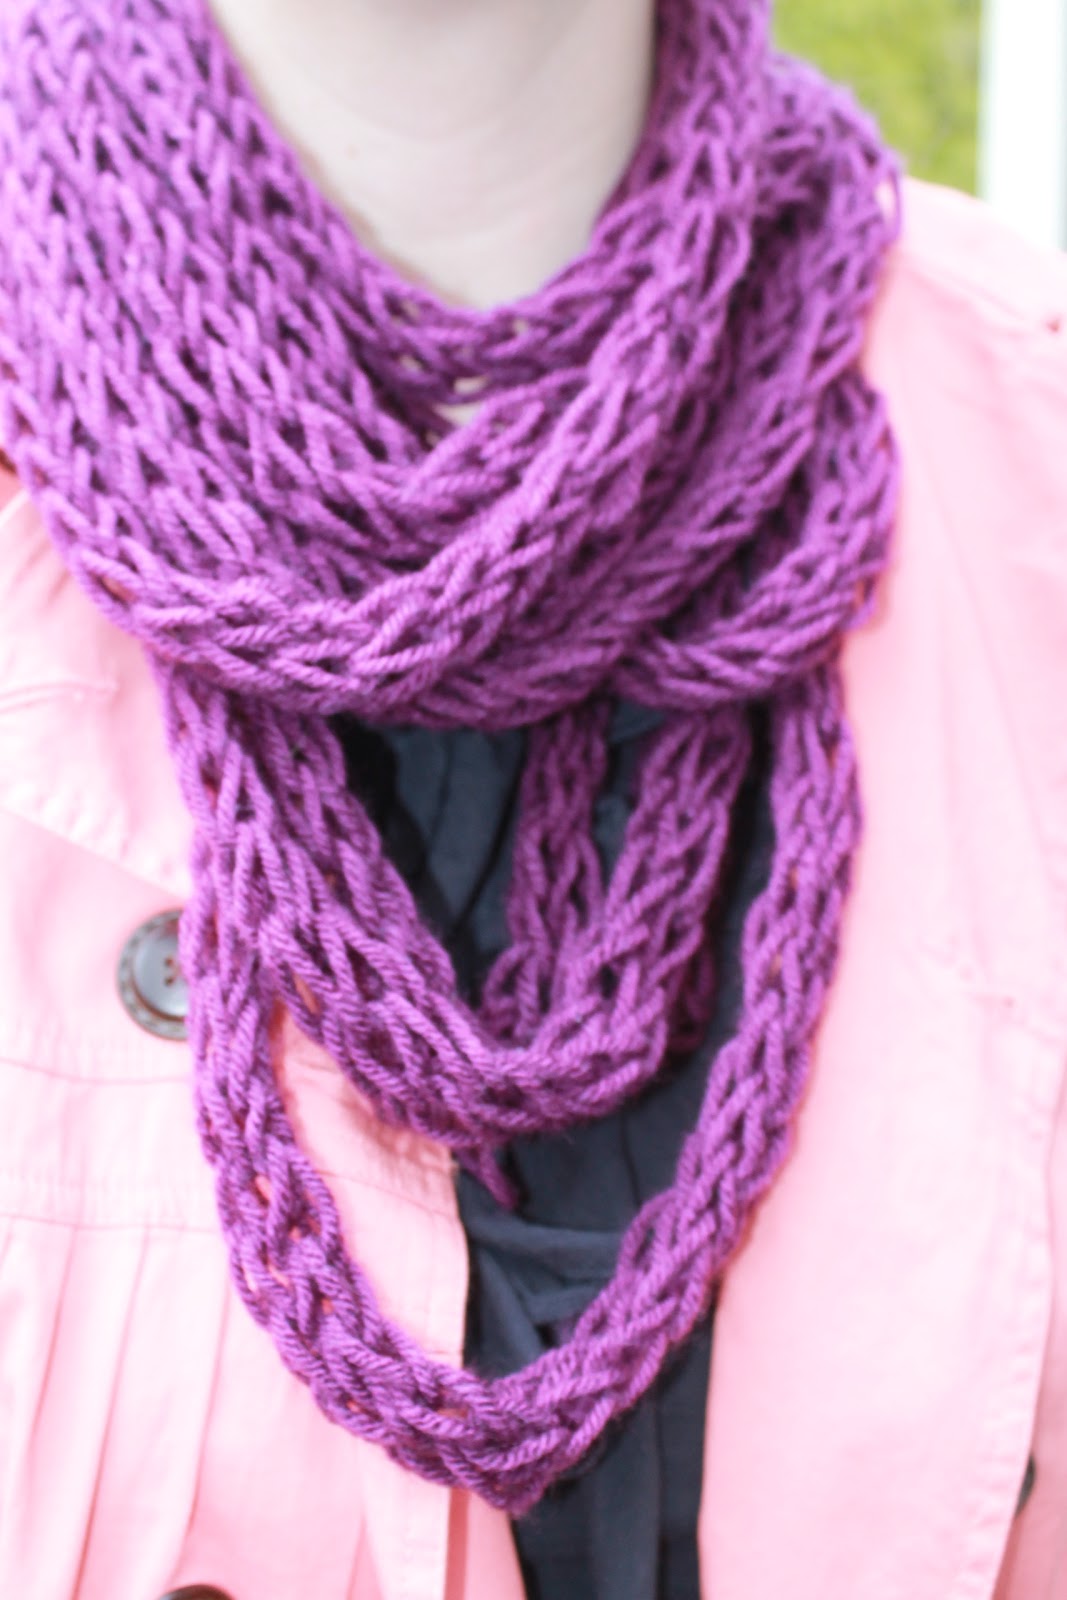 How to Finger Knit with Yarn using the Two Finger Knitting Style